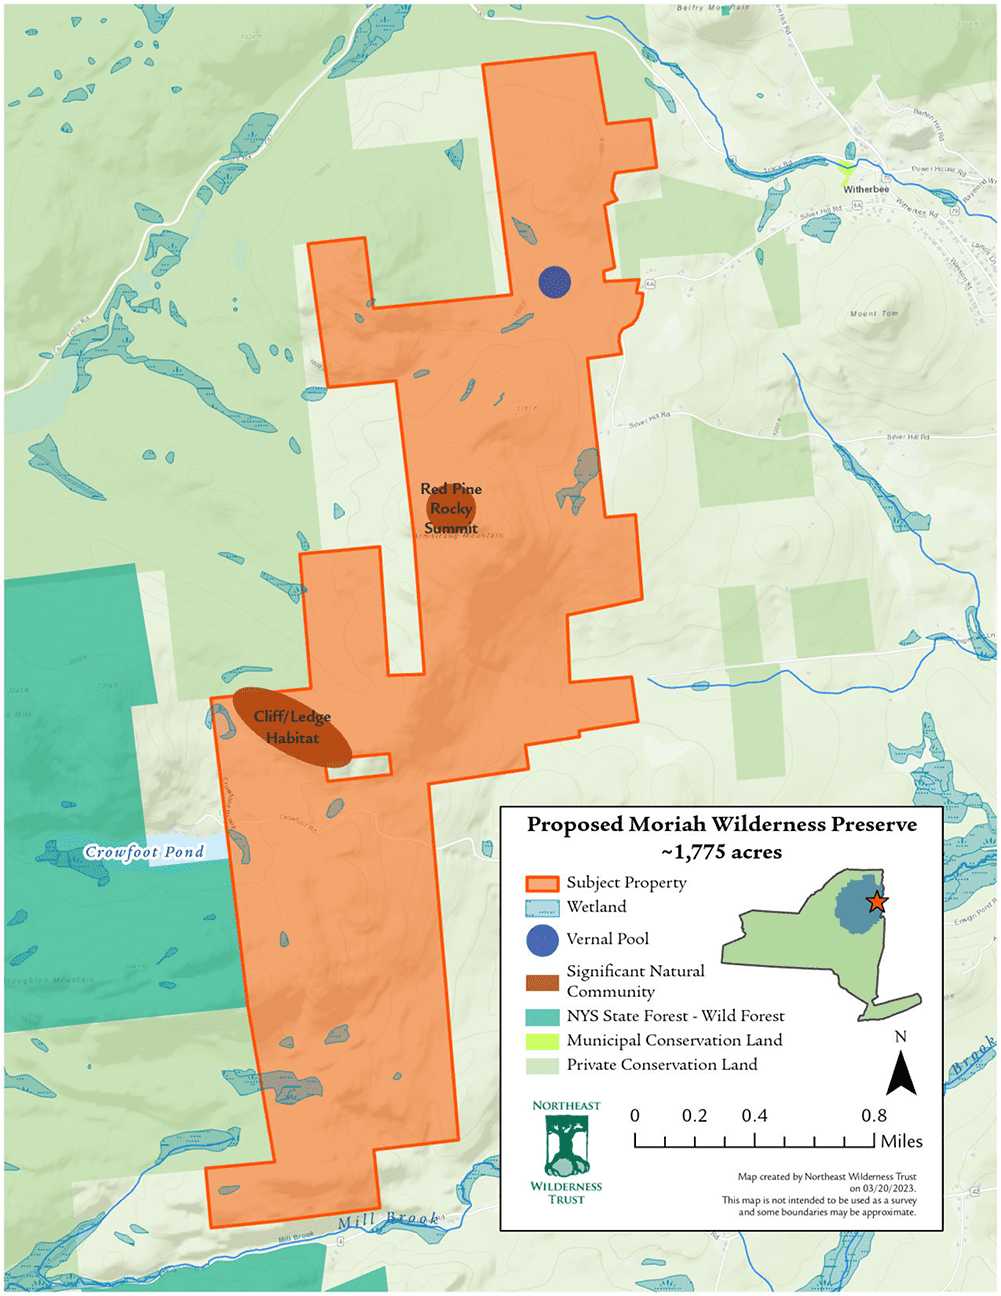 The Moriah Wilderness Preserve would be in the southern Champlain Valley. Map courtesy of the Northeast Wilderness Trust